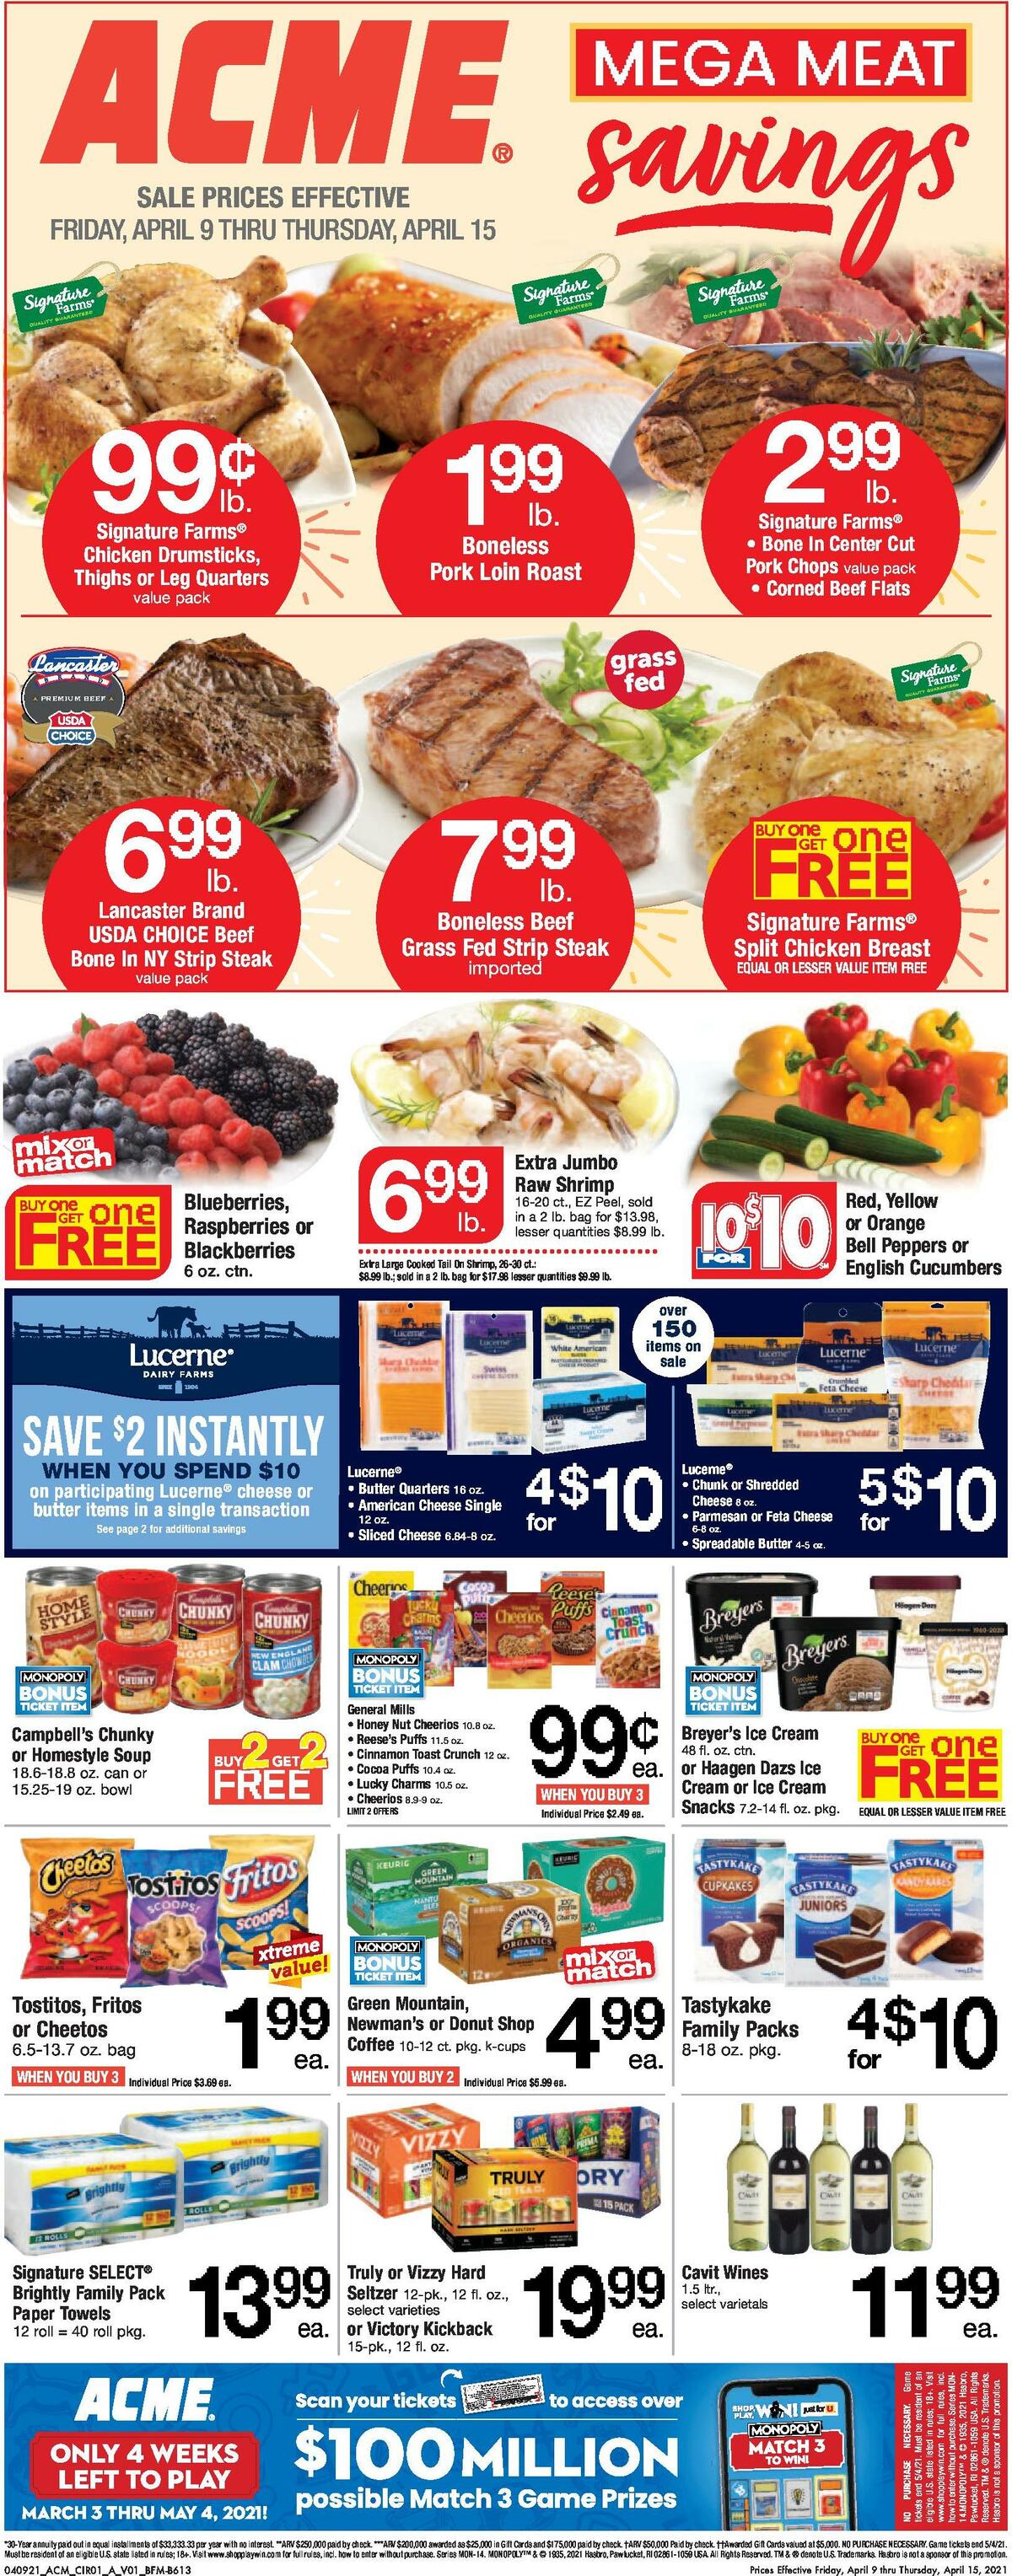 ACME Markets Weekly Ads & Special Buys from April 9